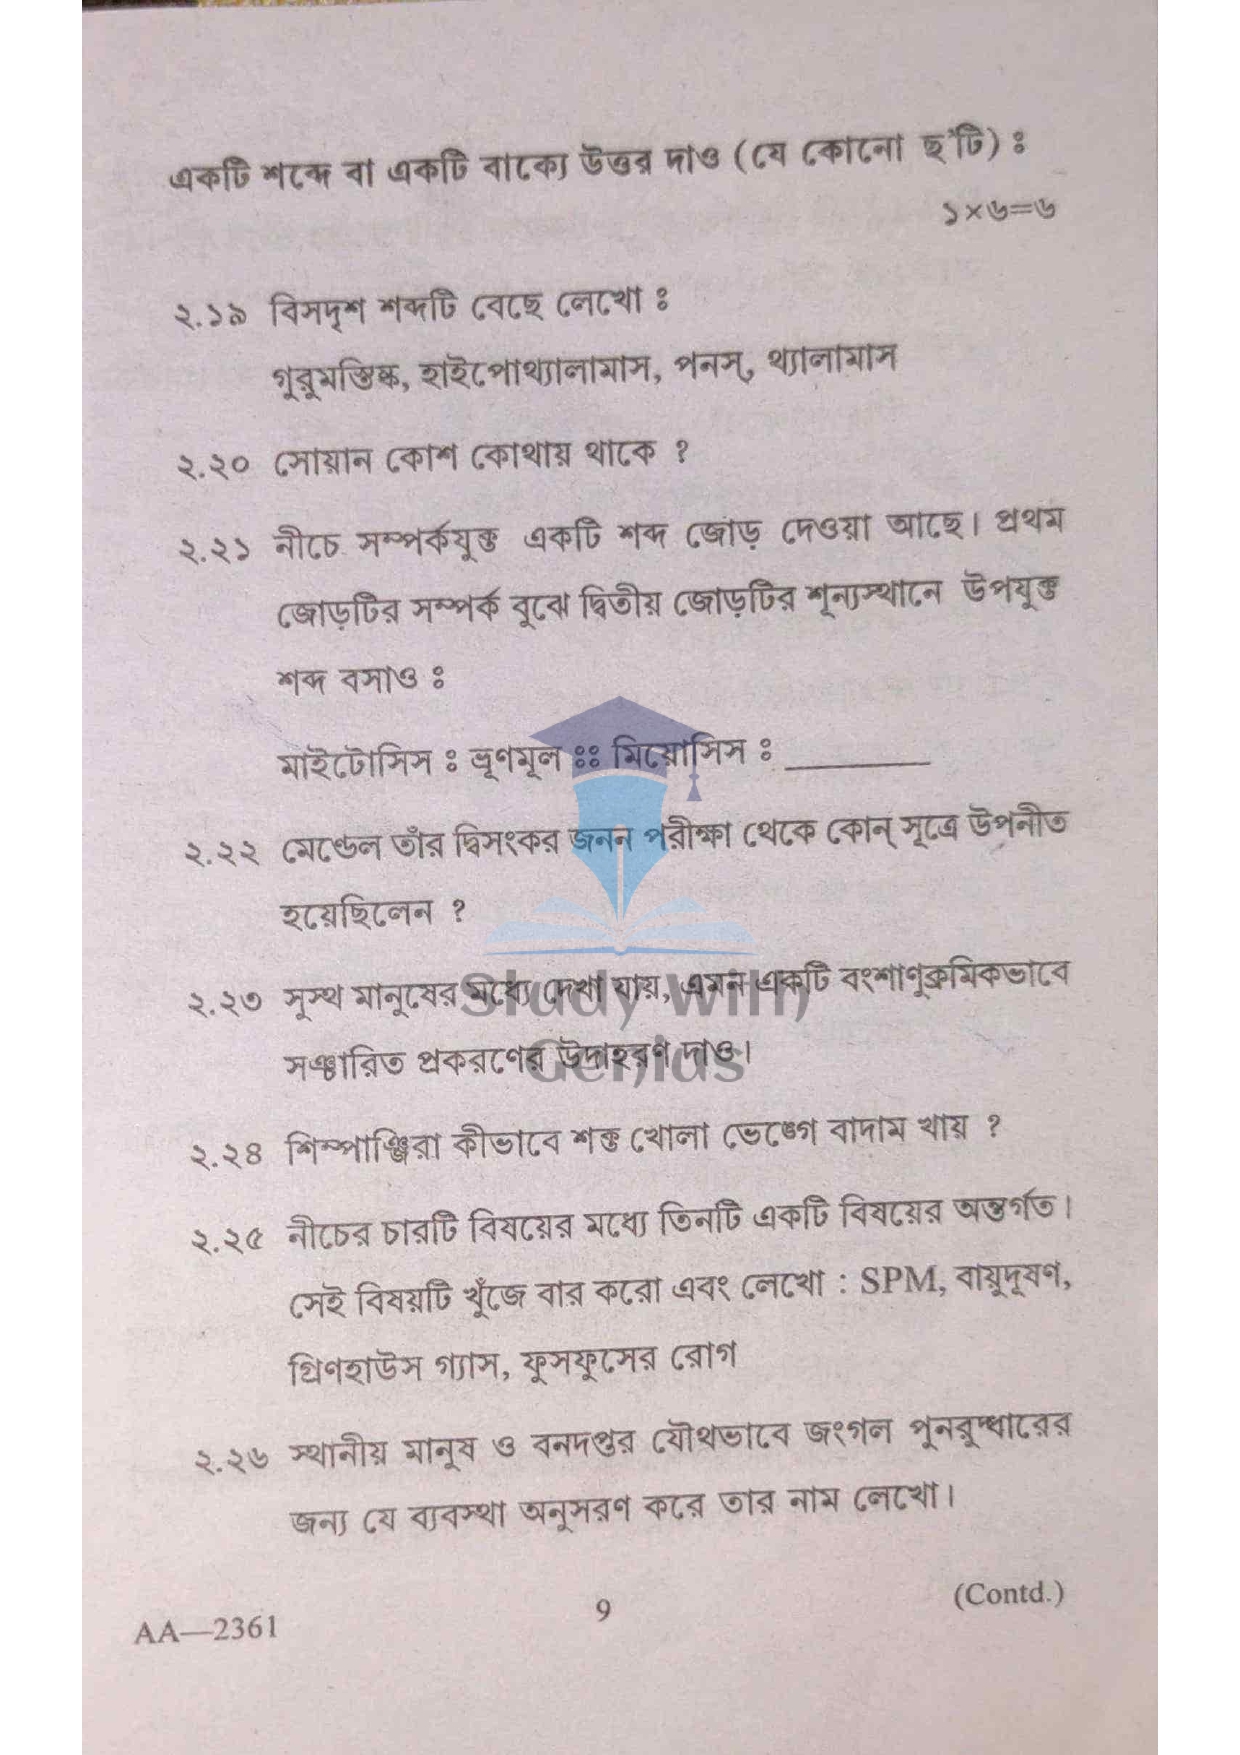 WBBSE Madhyamik Life Science Subject Question Papers Bengali Medium 2020